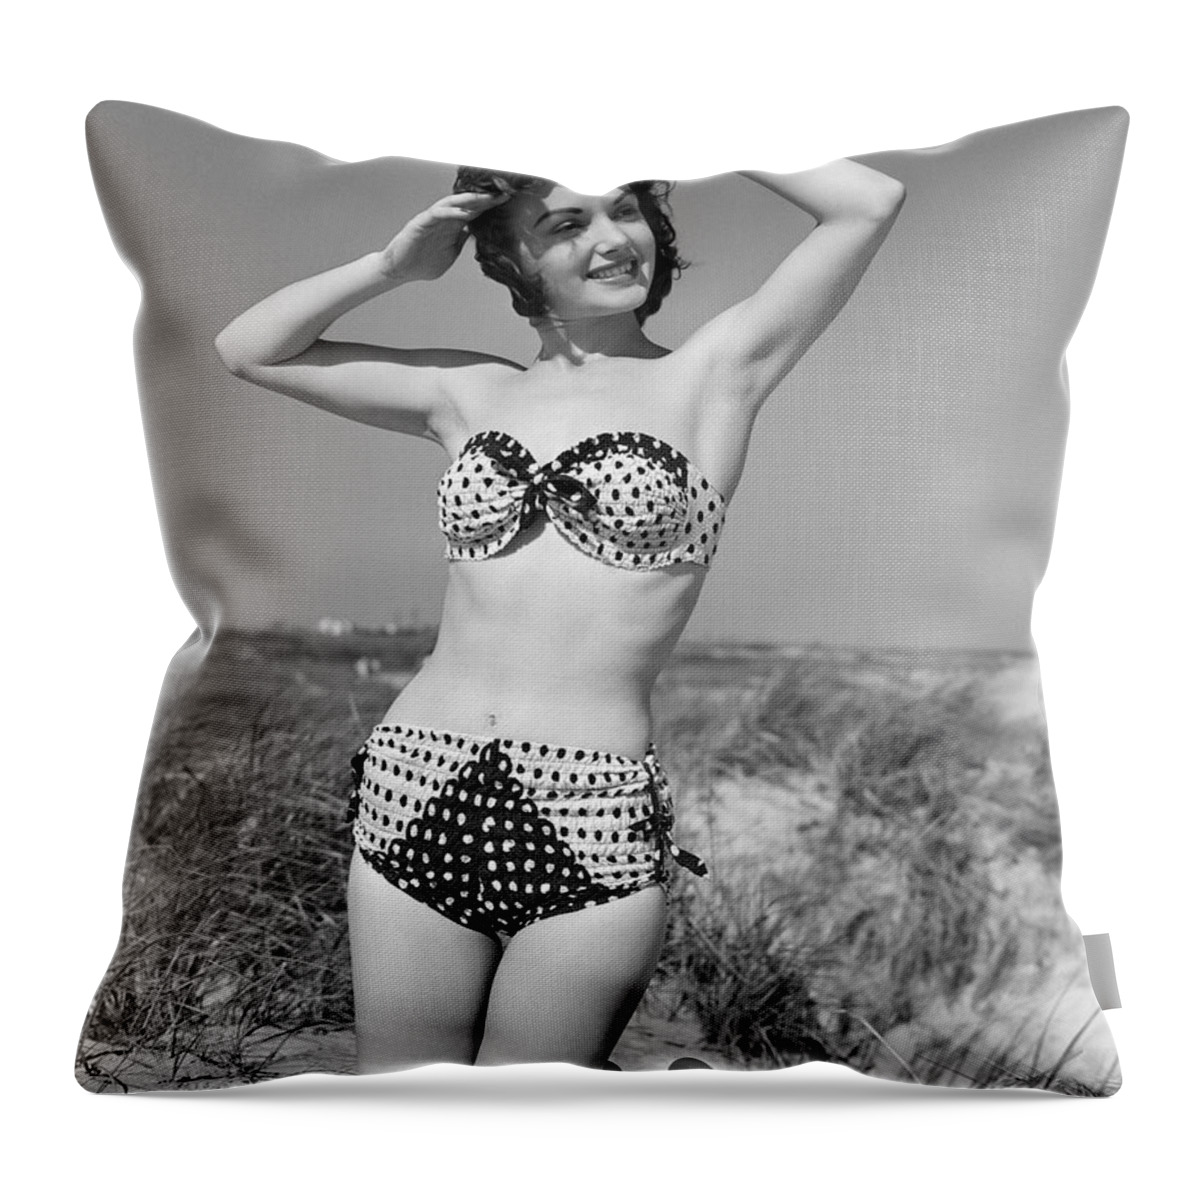 1950s Throw Pillow featuring the photograph Woman In Bikini, C.1950s by H. Armstrong Roberts/ClassicStock